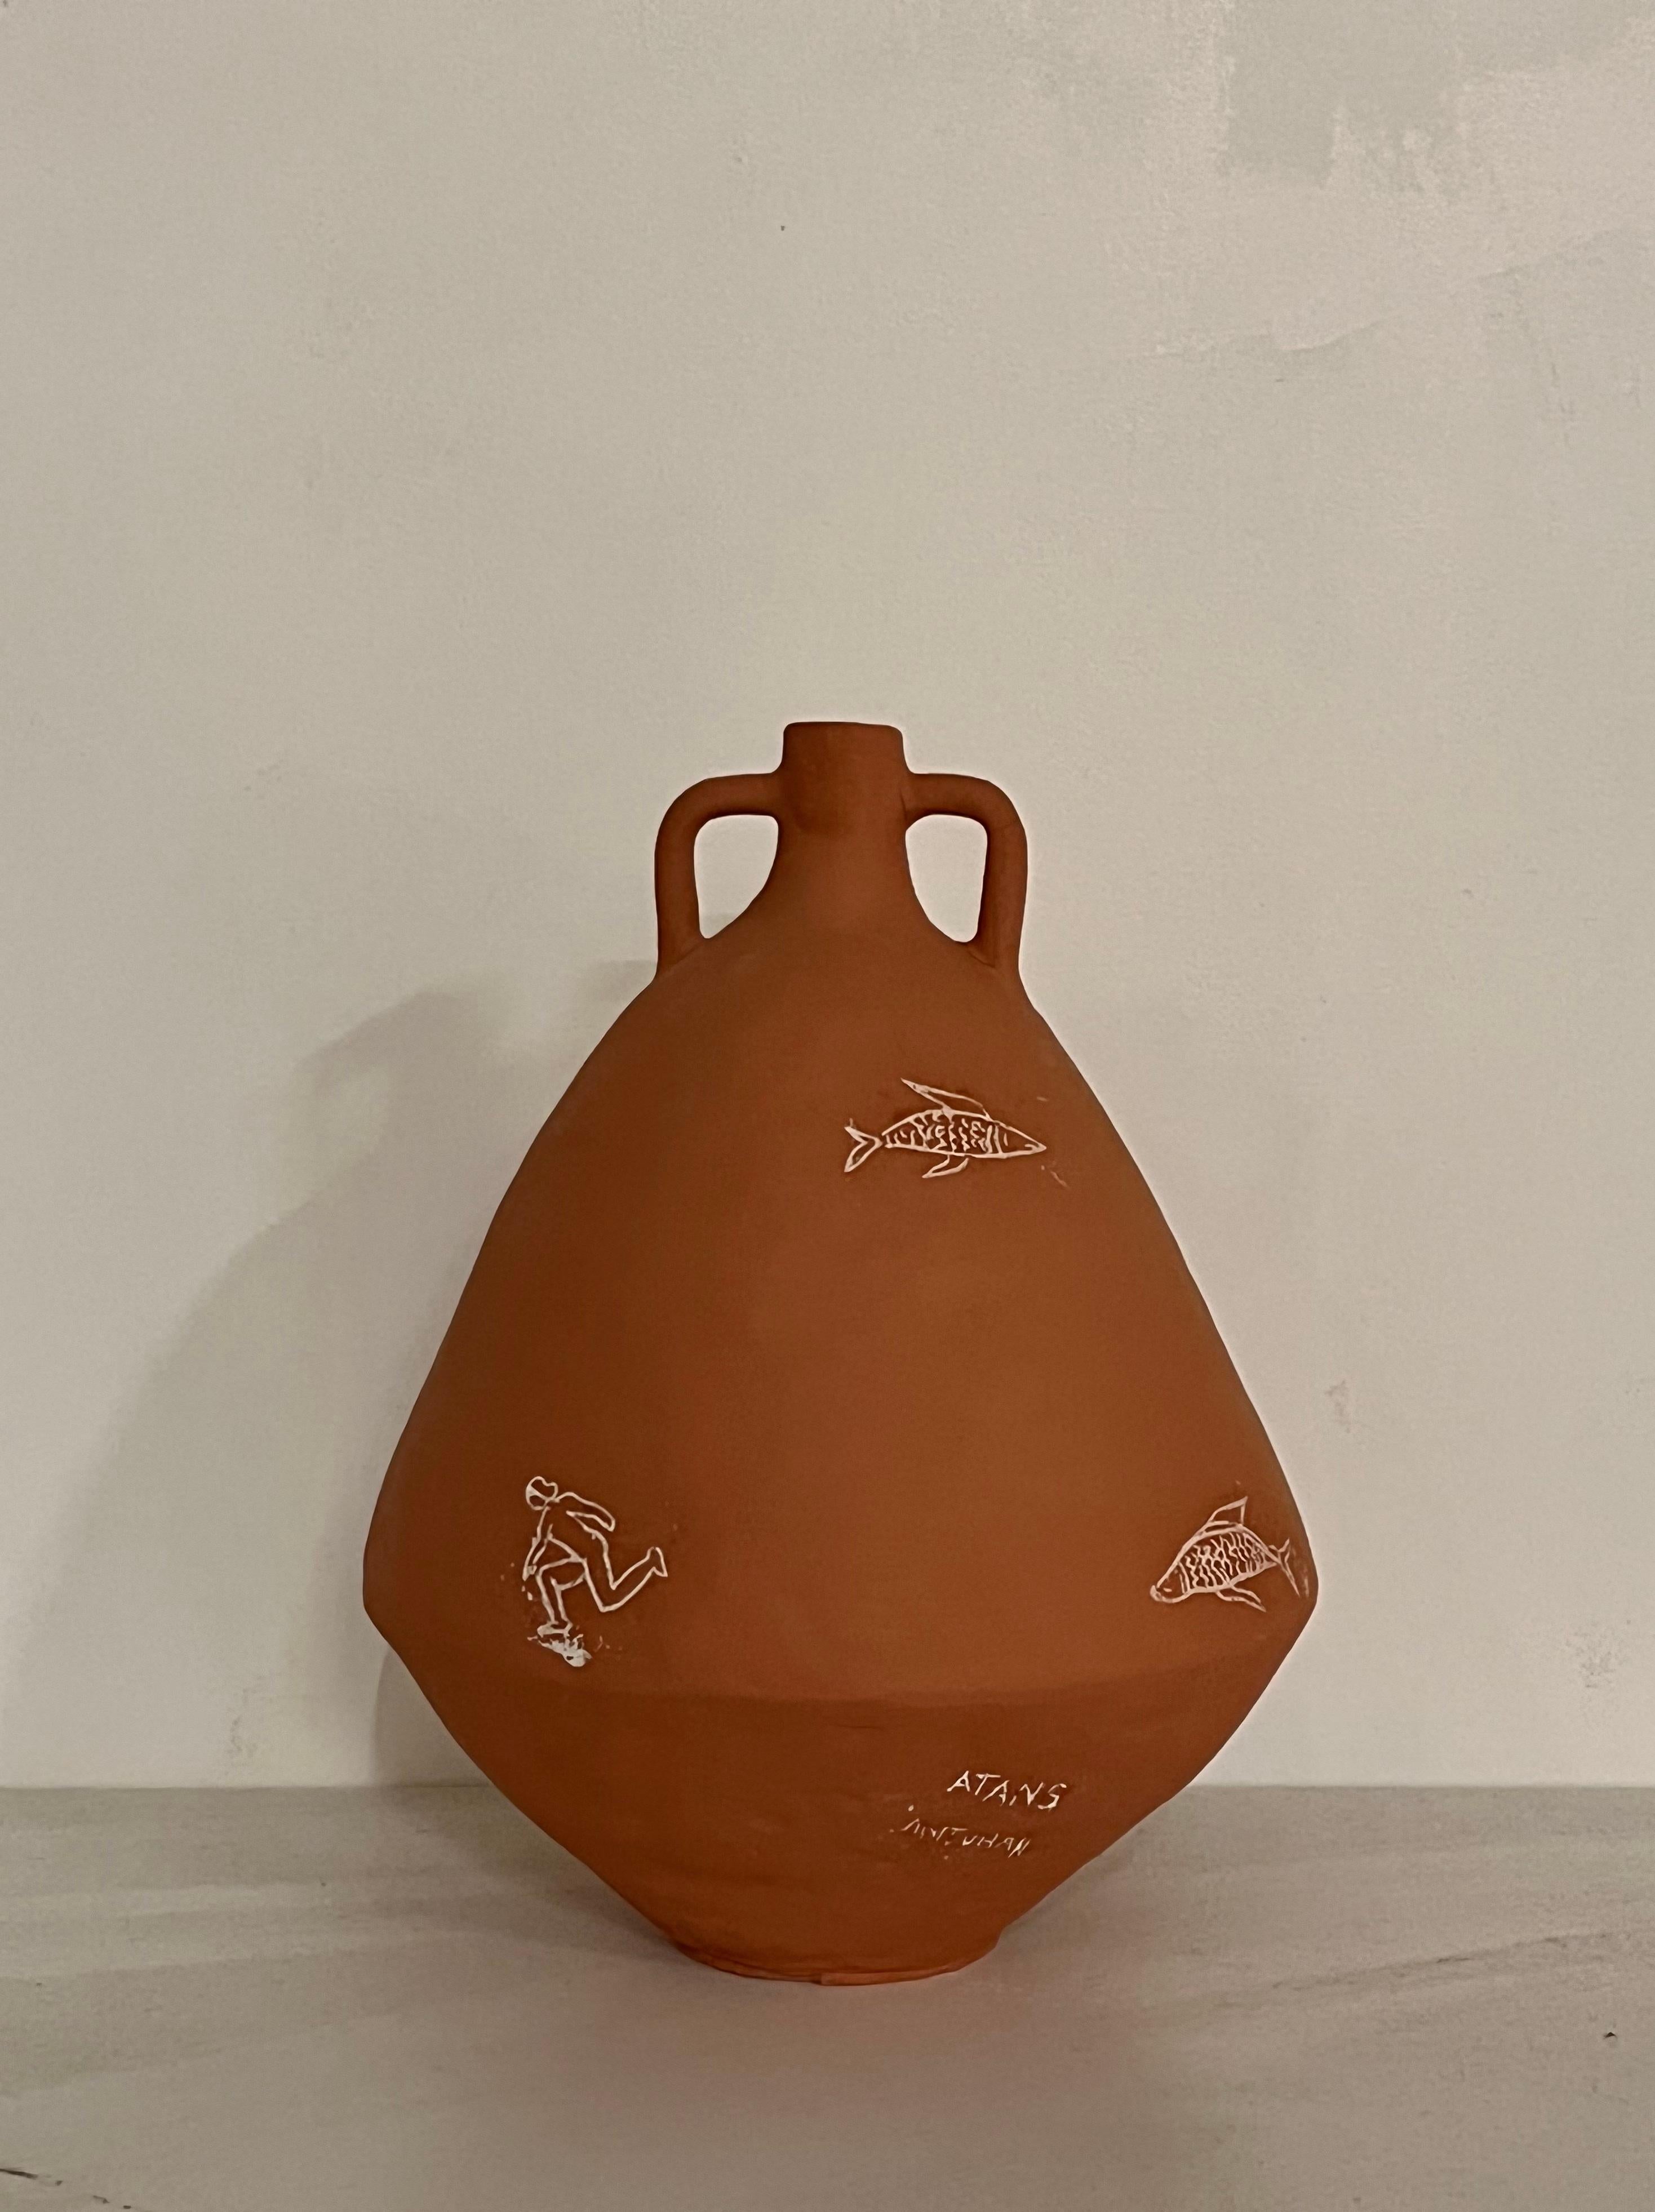 Terracotta Illustrated vase by Solem Ceramics
Dimensions: Ø 23 x H 30 cm.
Materials: Red stoneware, terracotta slip.

Solem’s work pulls from memories of the architecture and community within SWANA and Southeast Asia thorough exploring familiar